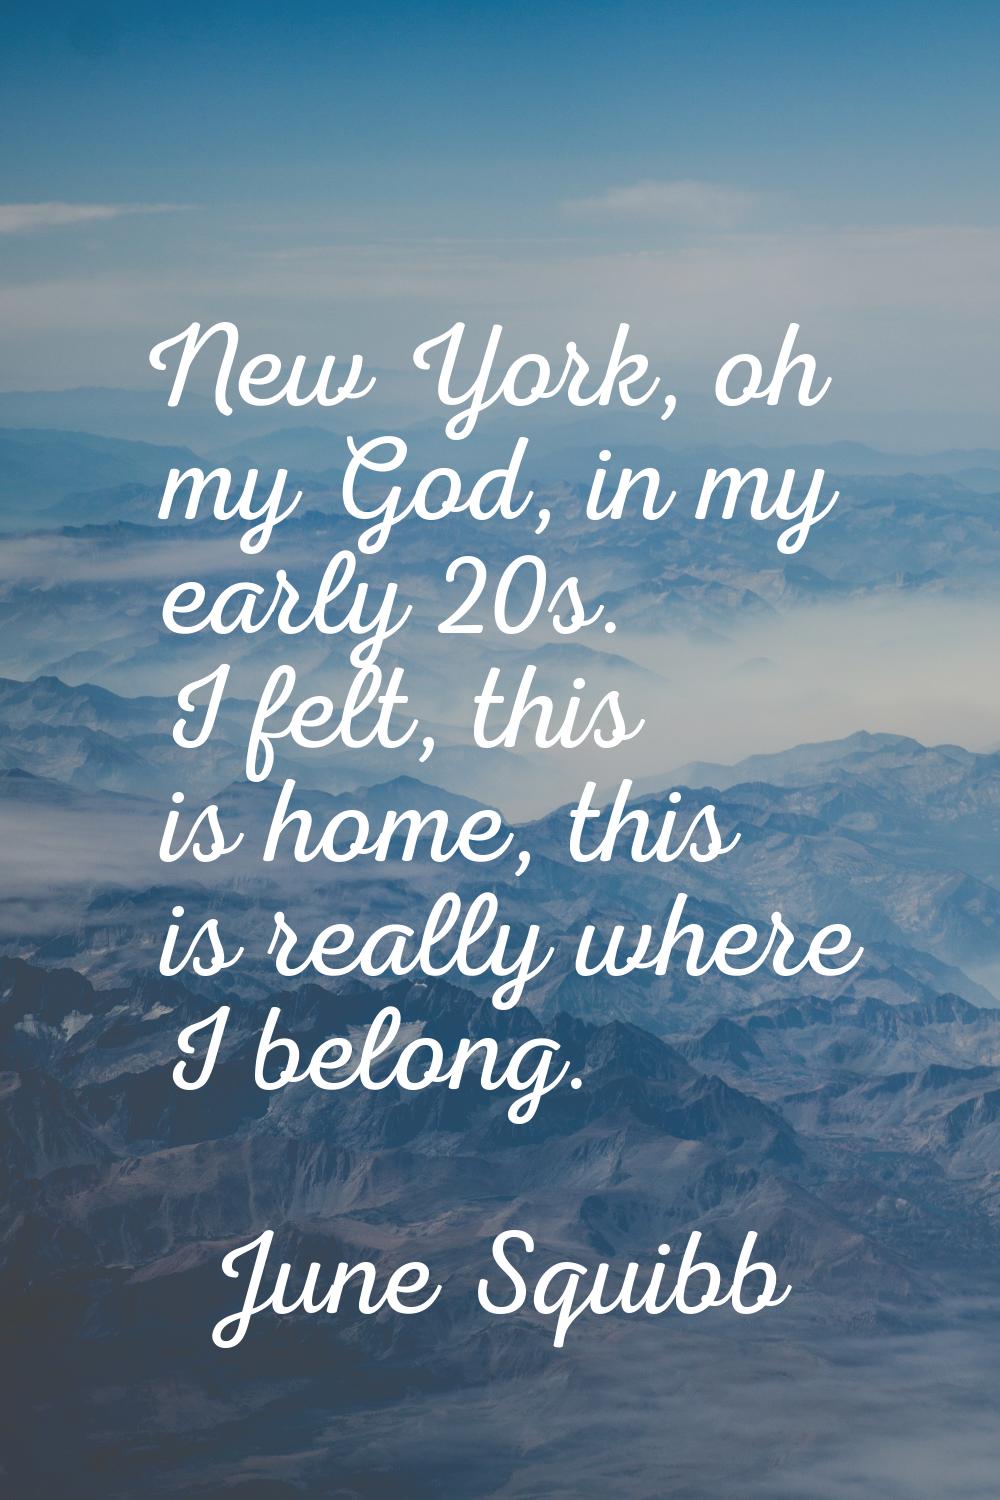 New York, oh my God, in my early 20s. I felt, this is home, this is really where I belong.